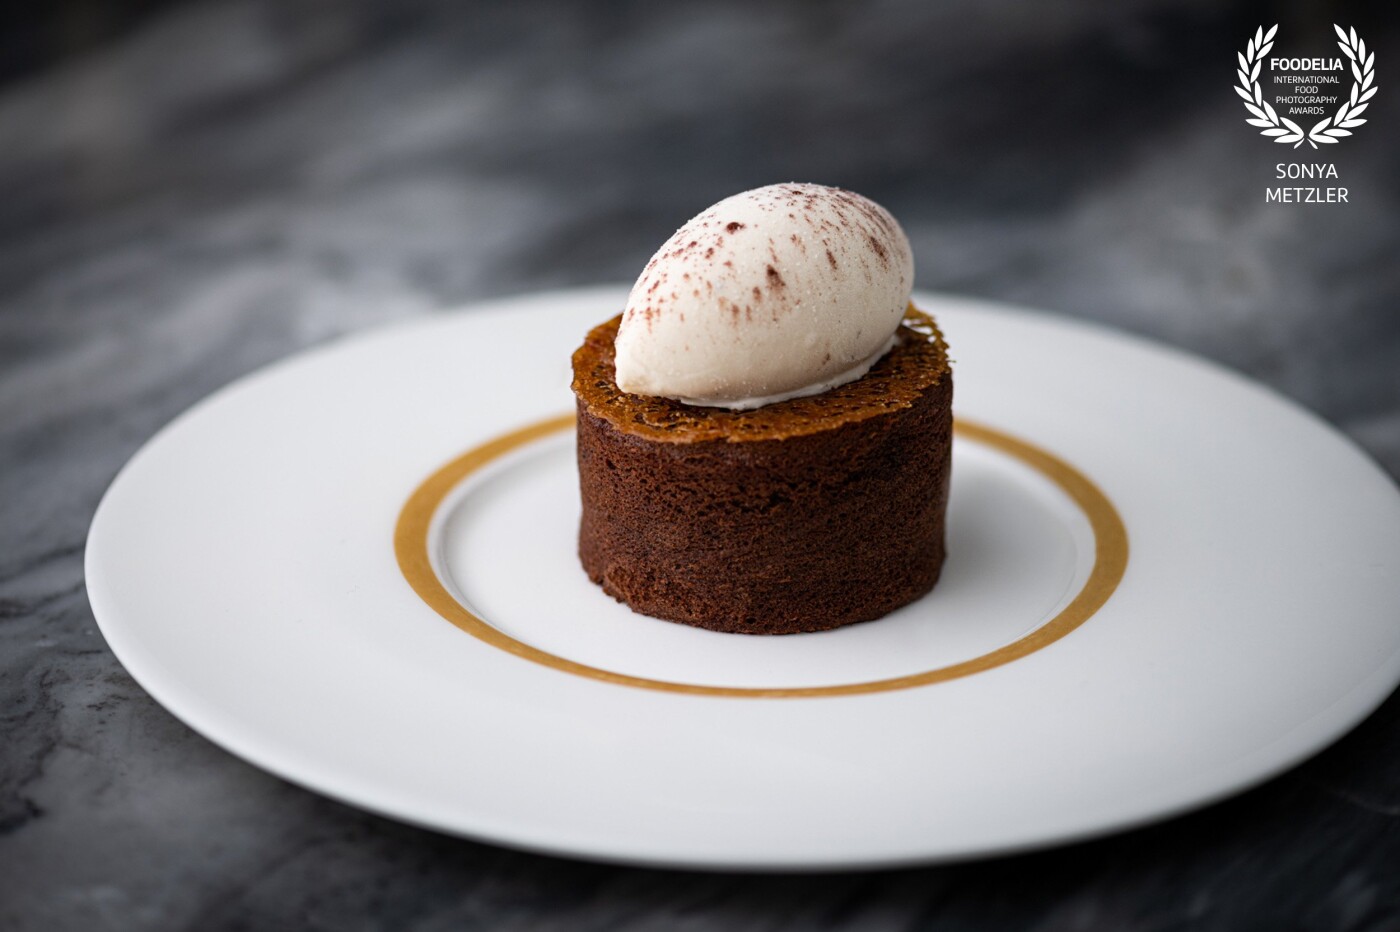 Chocolate Fondant With Roasted Cinnamon Ice Cream And Caramel Crisp<br />
<br />
By Chef @tom_peters_chef<br />
Restaurant @bobbobricard in St. James, London